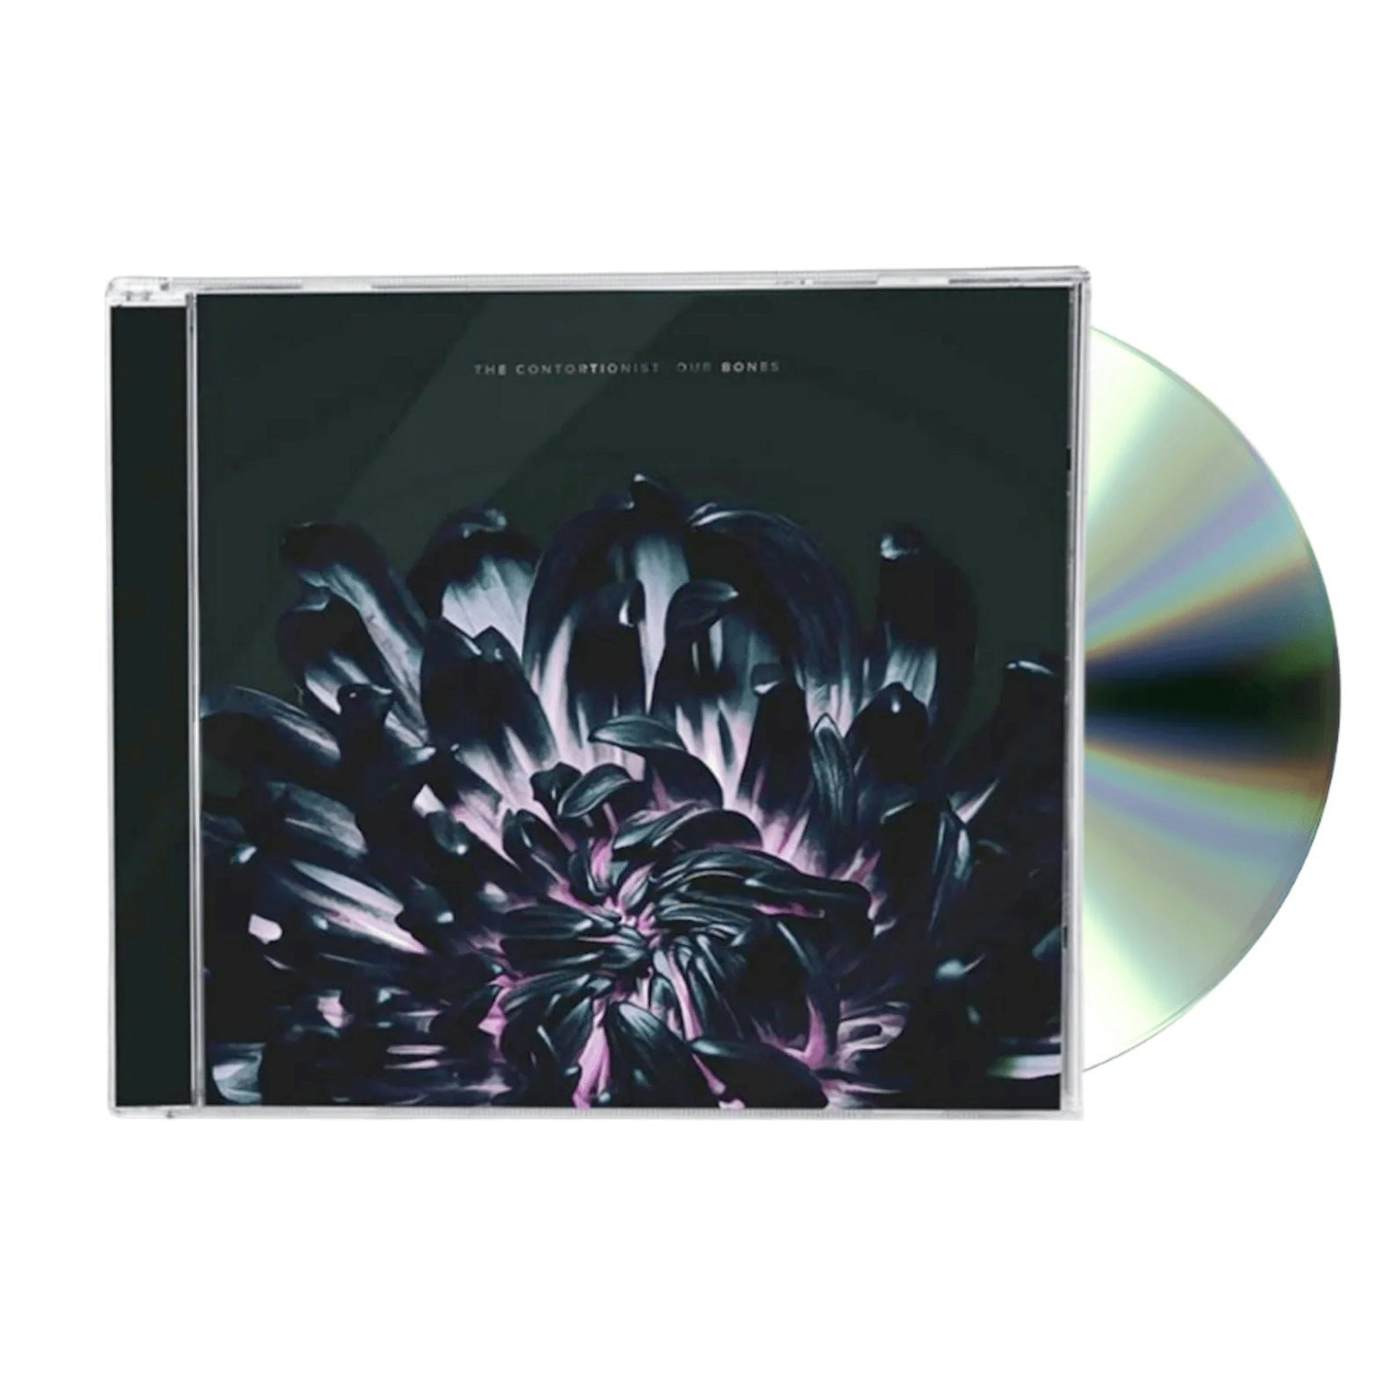 The Contortionist "Our Bones" CD